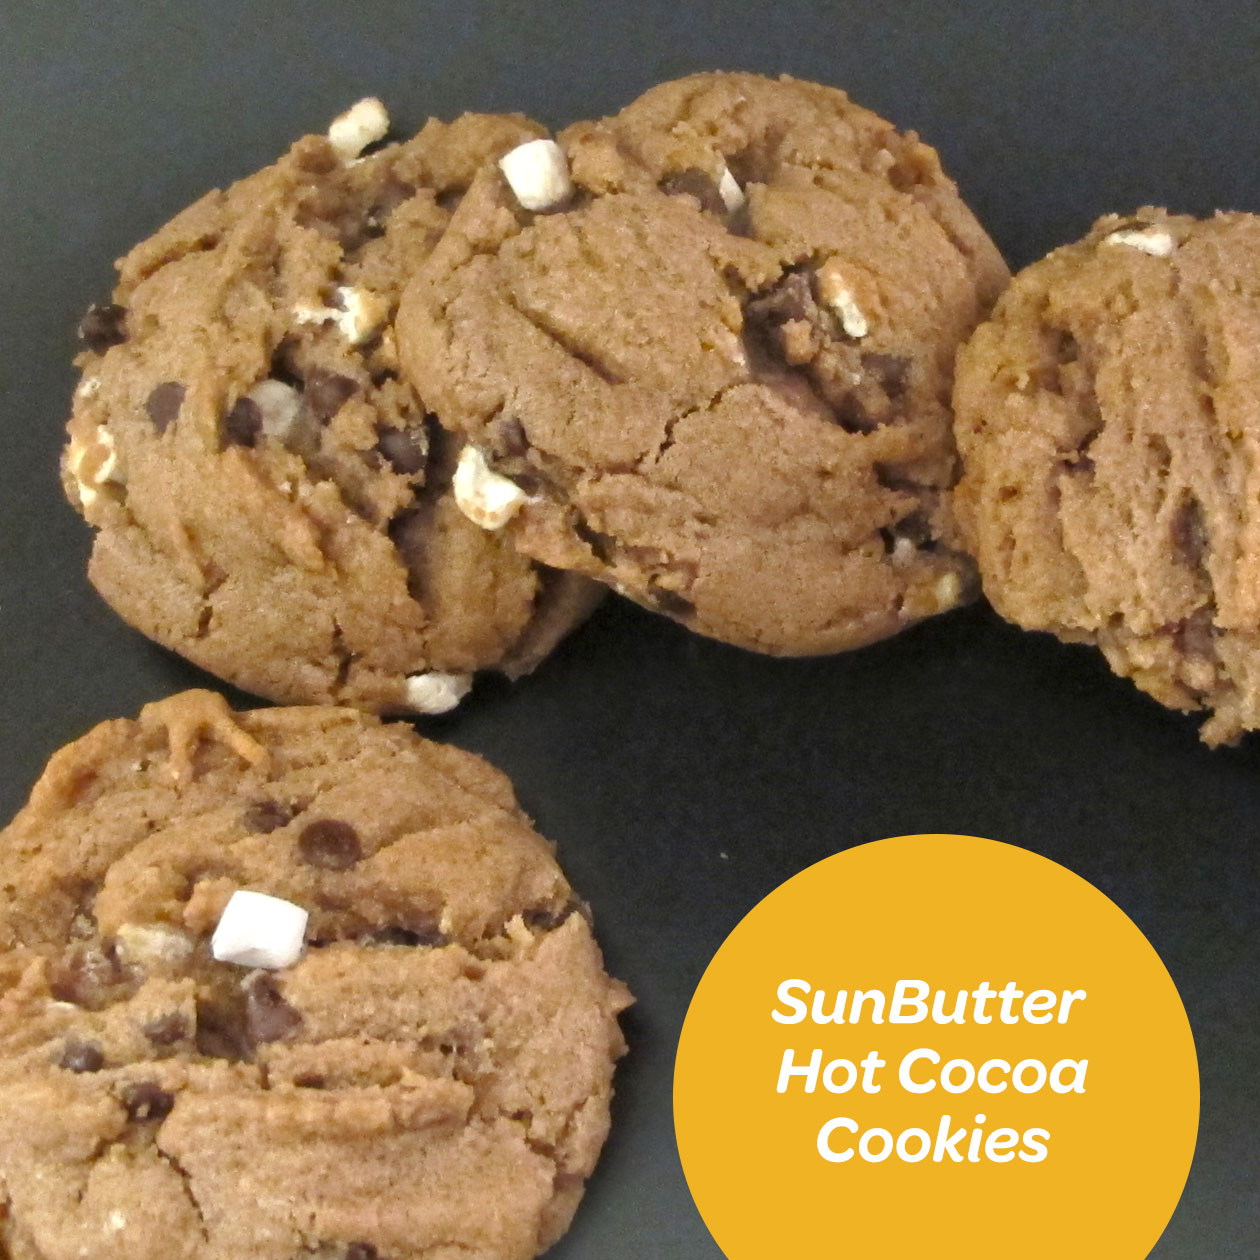 SunButter Hot Cocoa Cookies with sweet little mallow bits are a cozy treat!